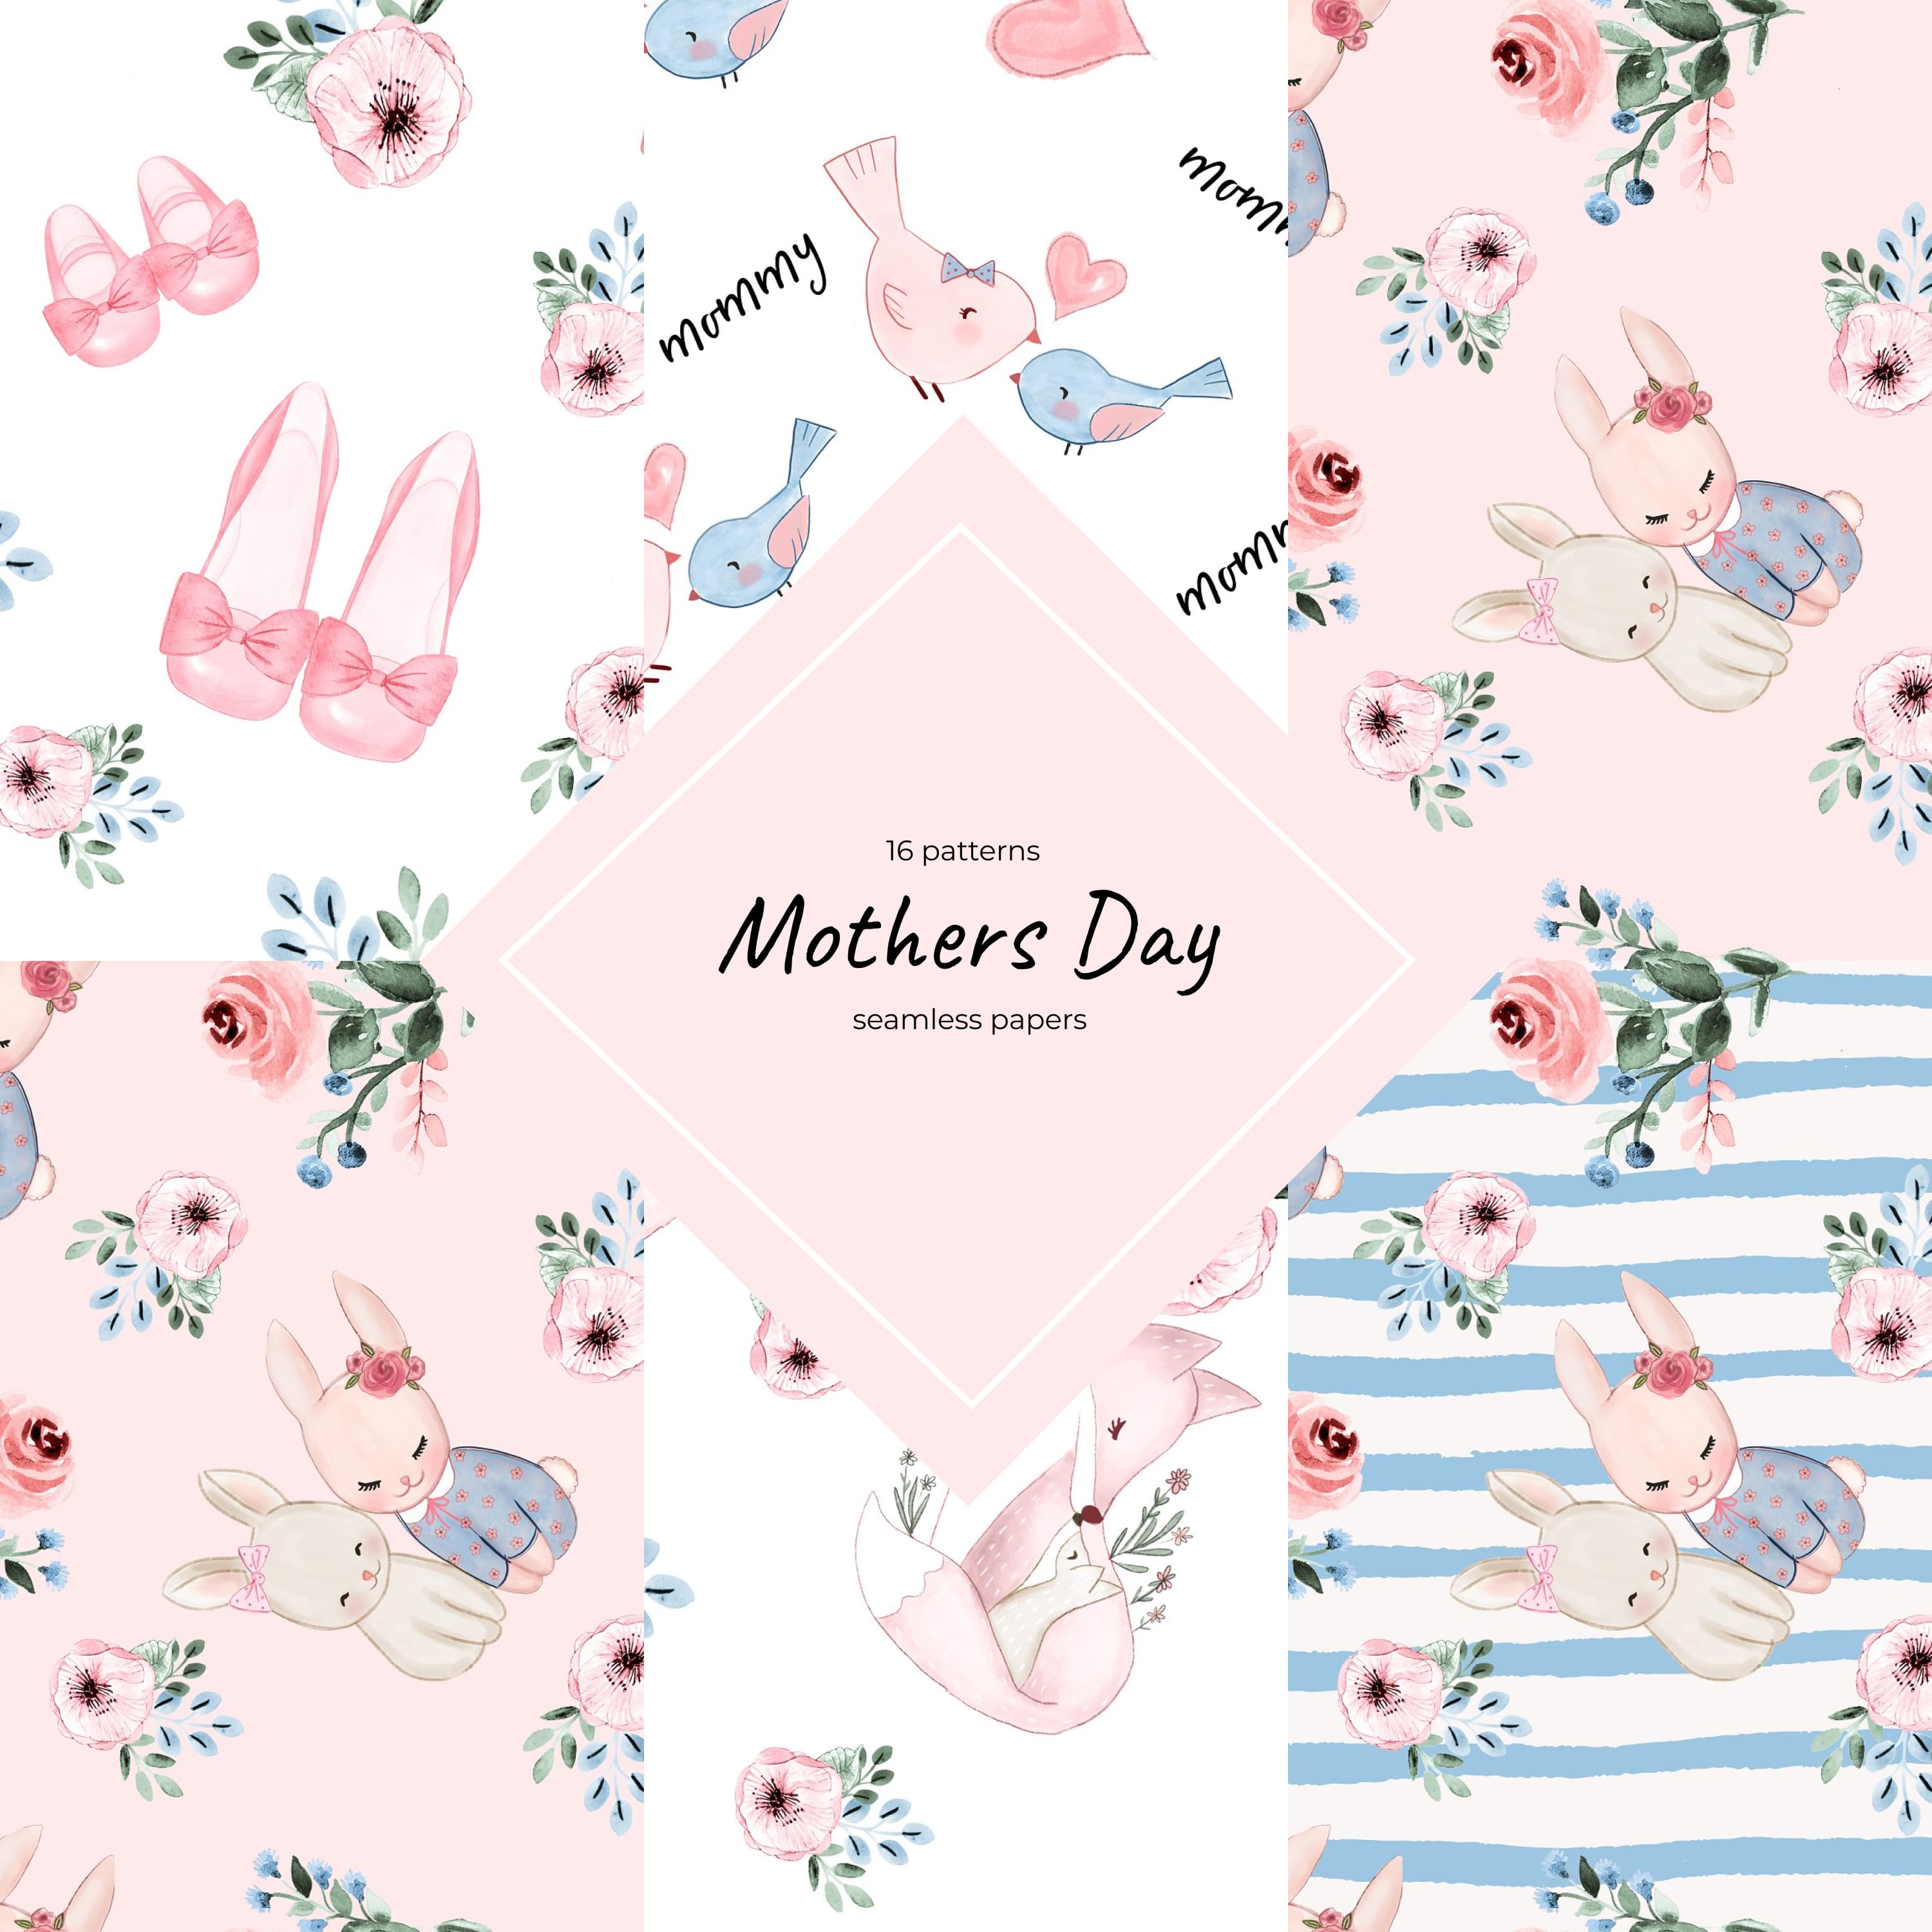 Mothers Day seamless papers.